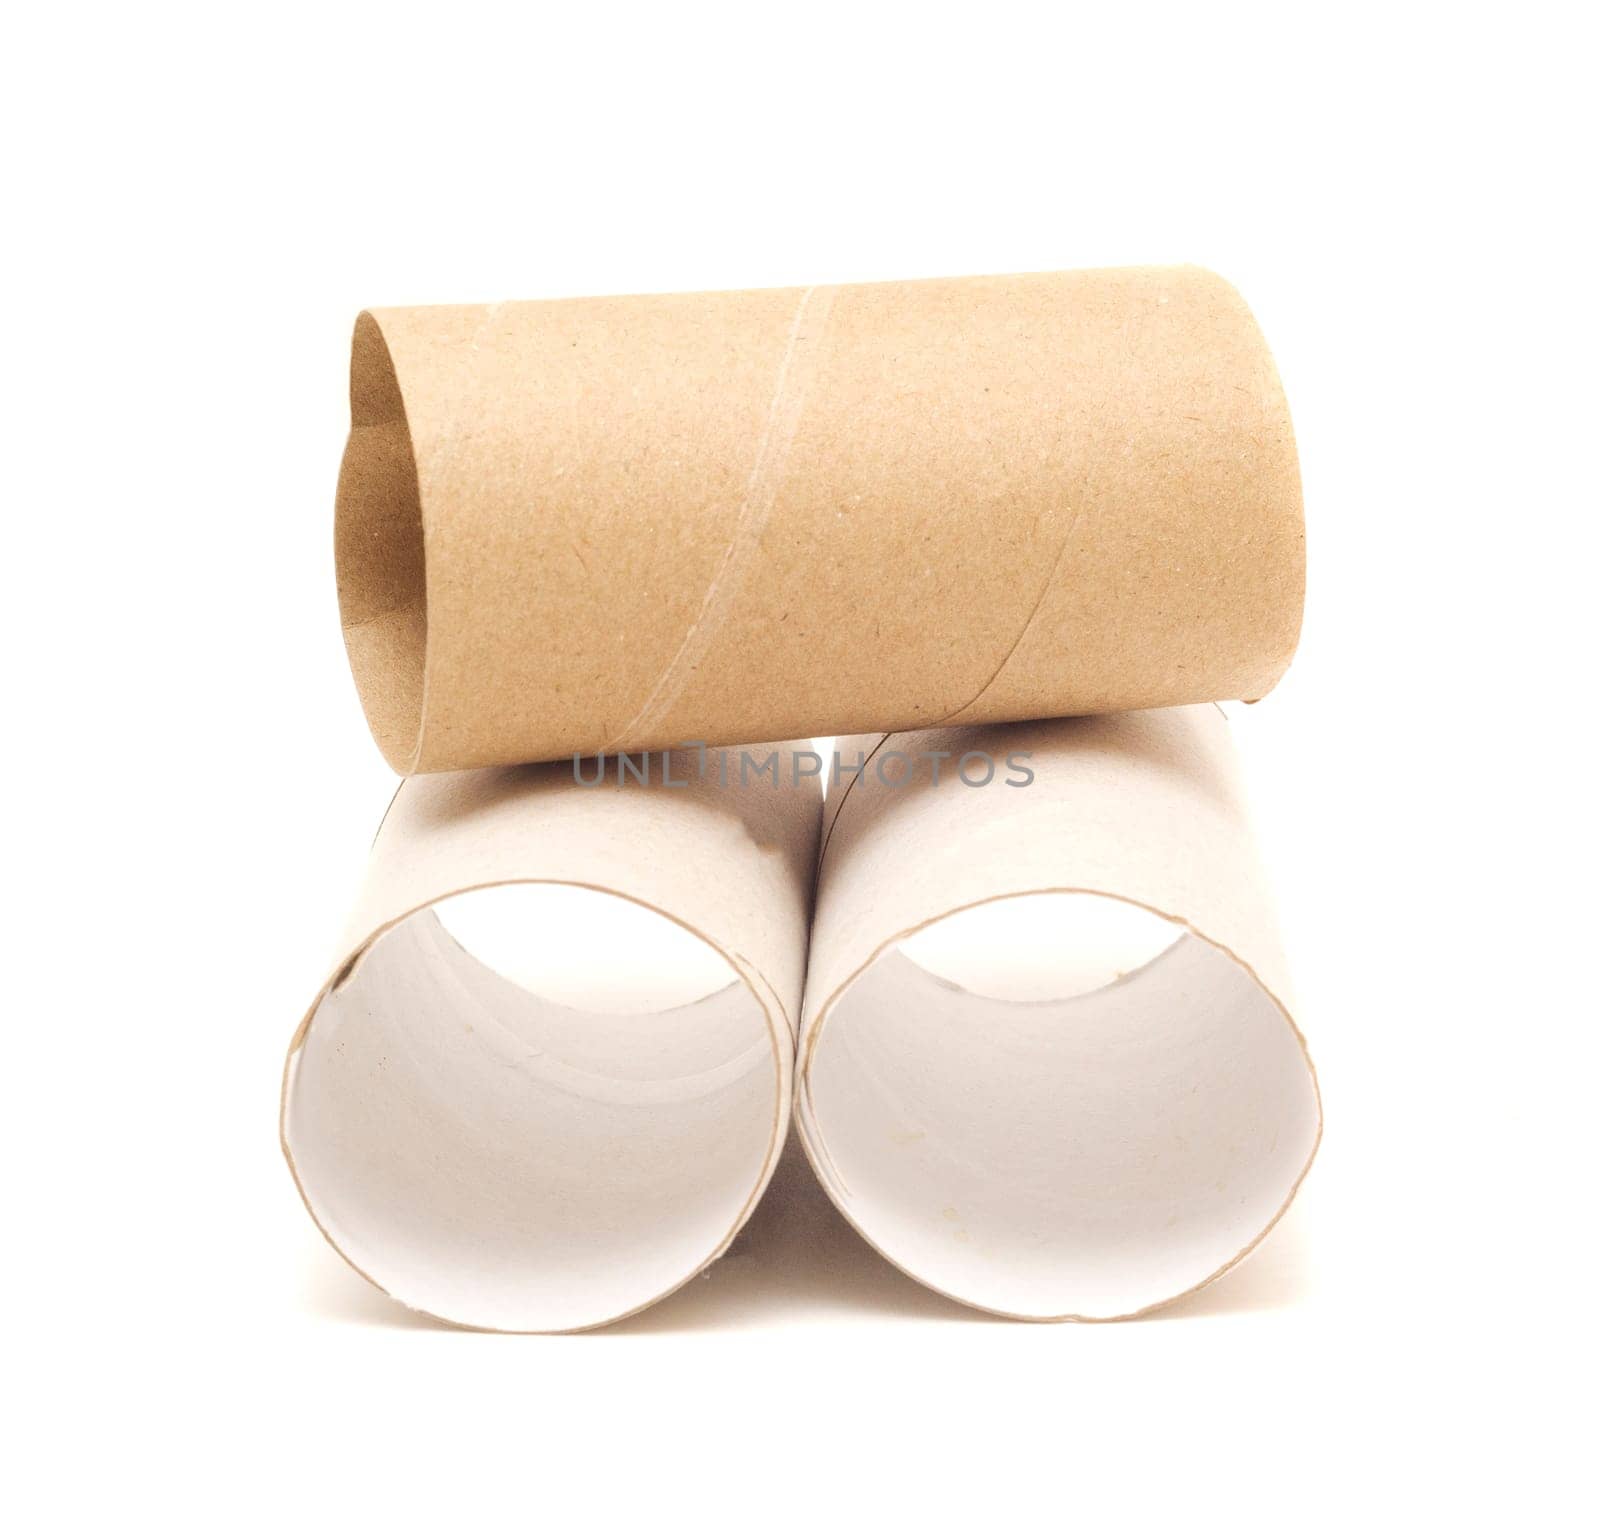 Three empty toilet rolls isolated on white background by andre_dechapelle